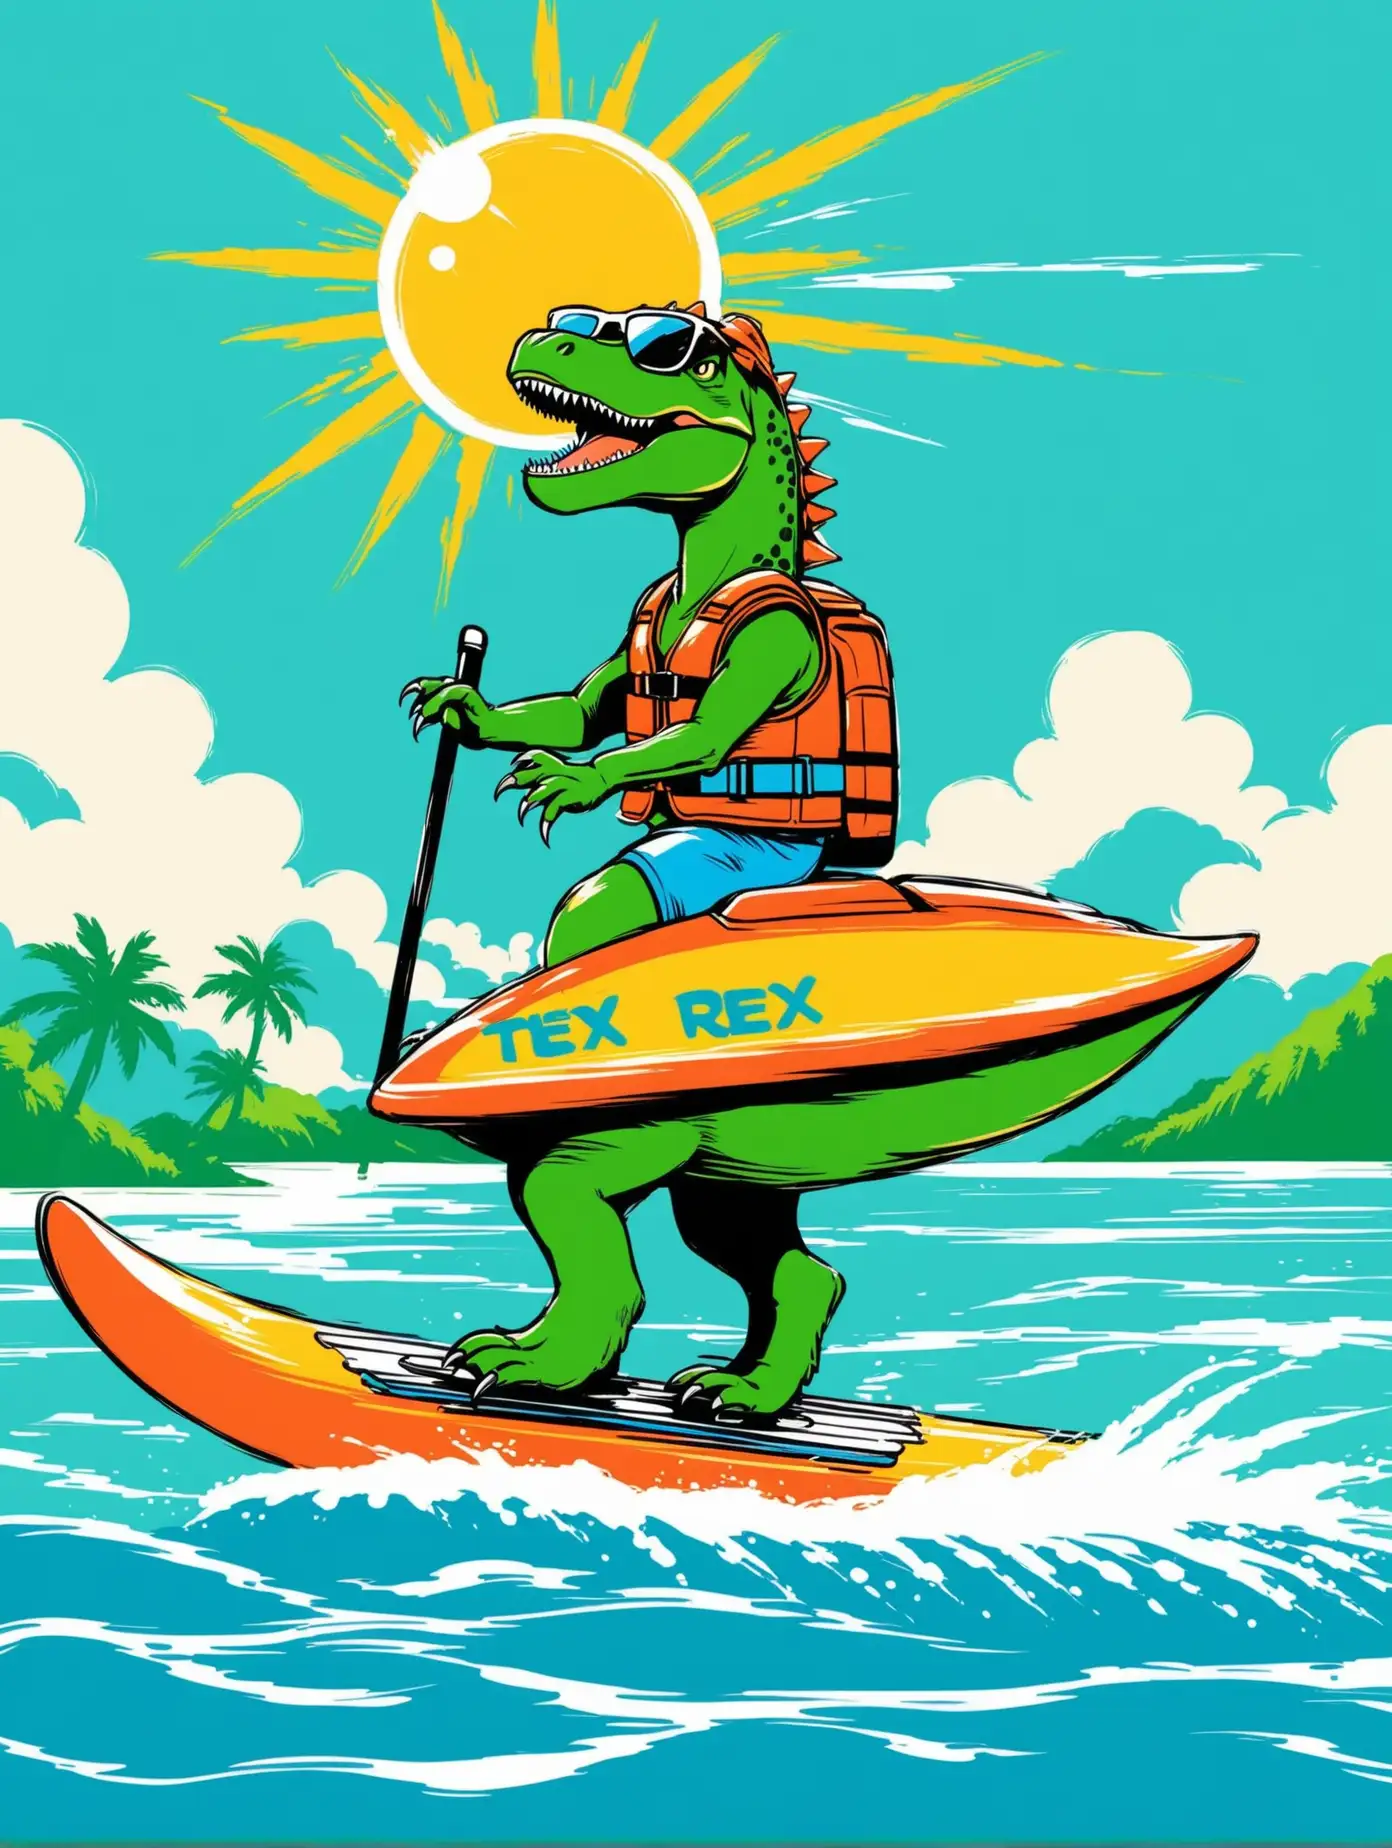 TRex Dinosaur Water Skiing in Sunglasses and Life Vest